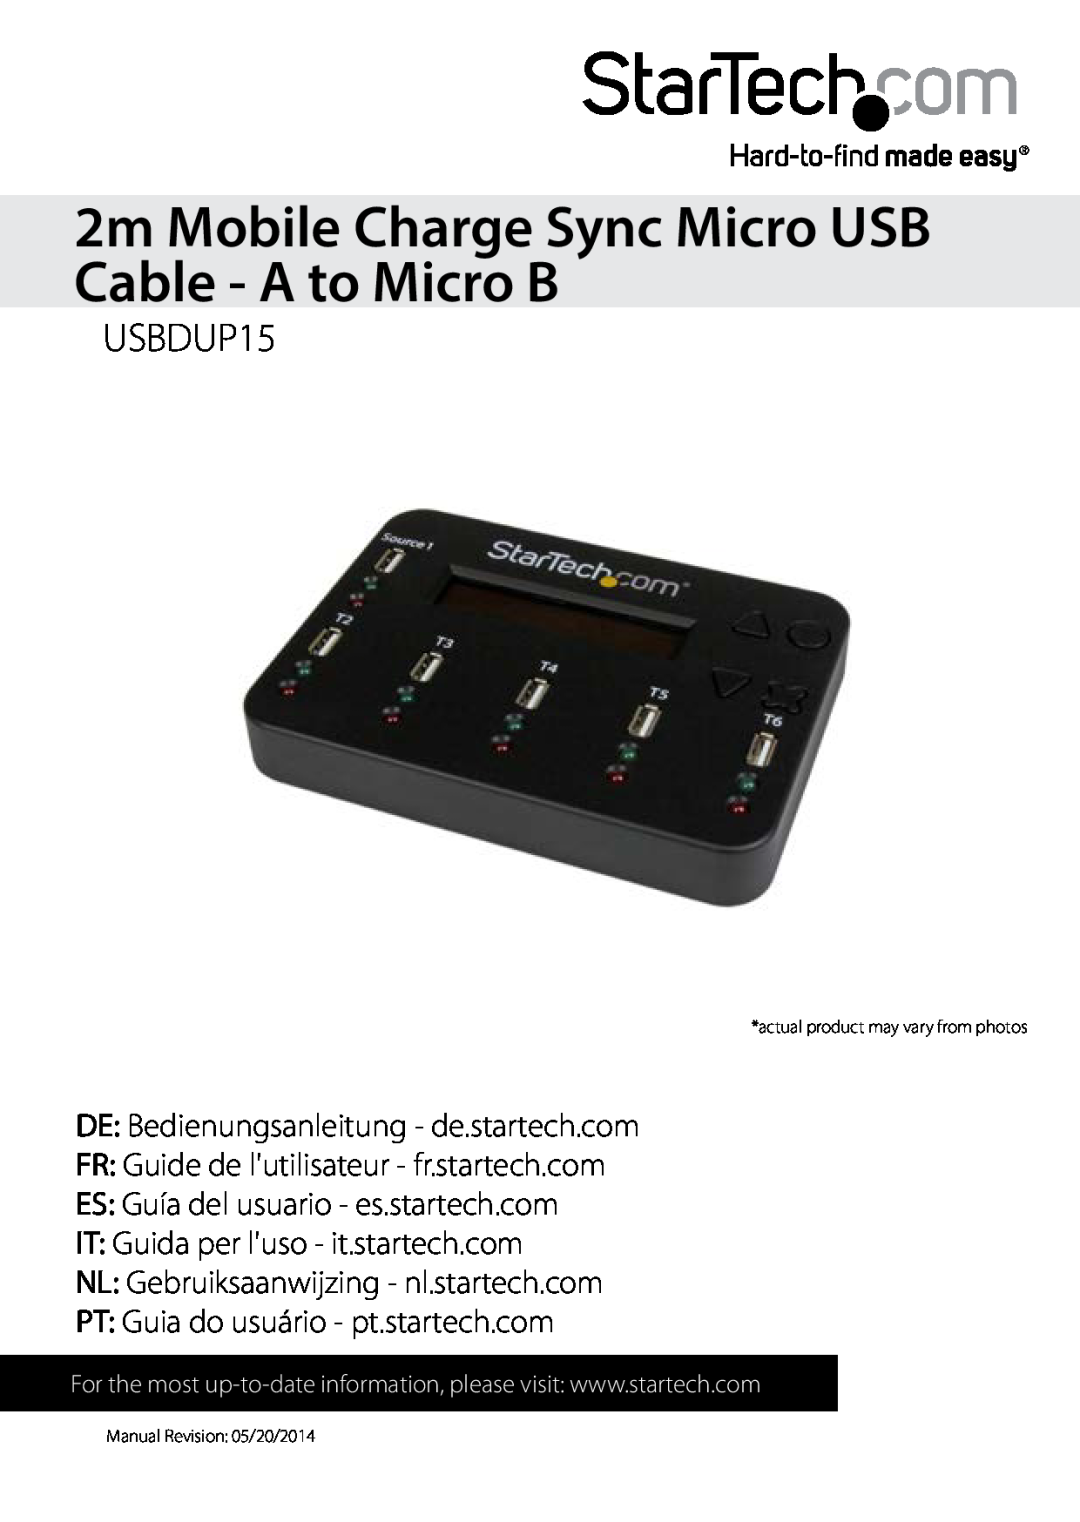 StarTech.com USBDUP15 manual 2m Mobile Charge Sync Micro USB Cable - A to Micro B, ES Guía del usuario - es.startech.com 